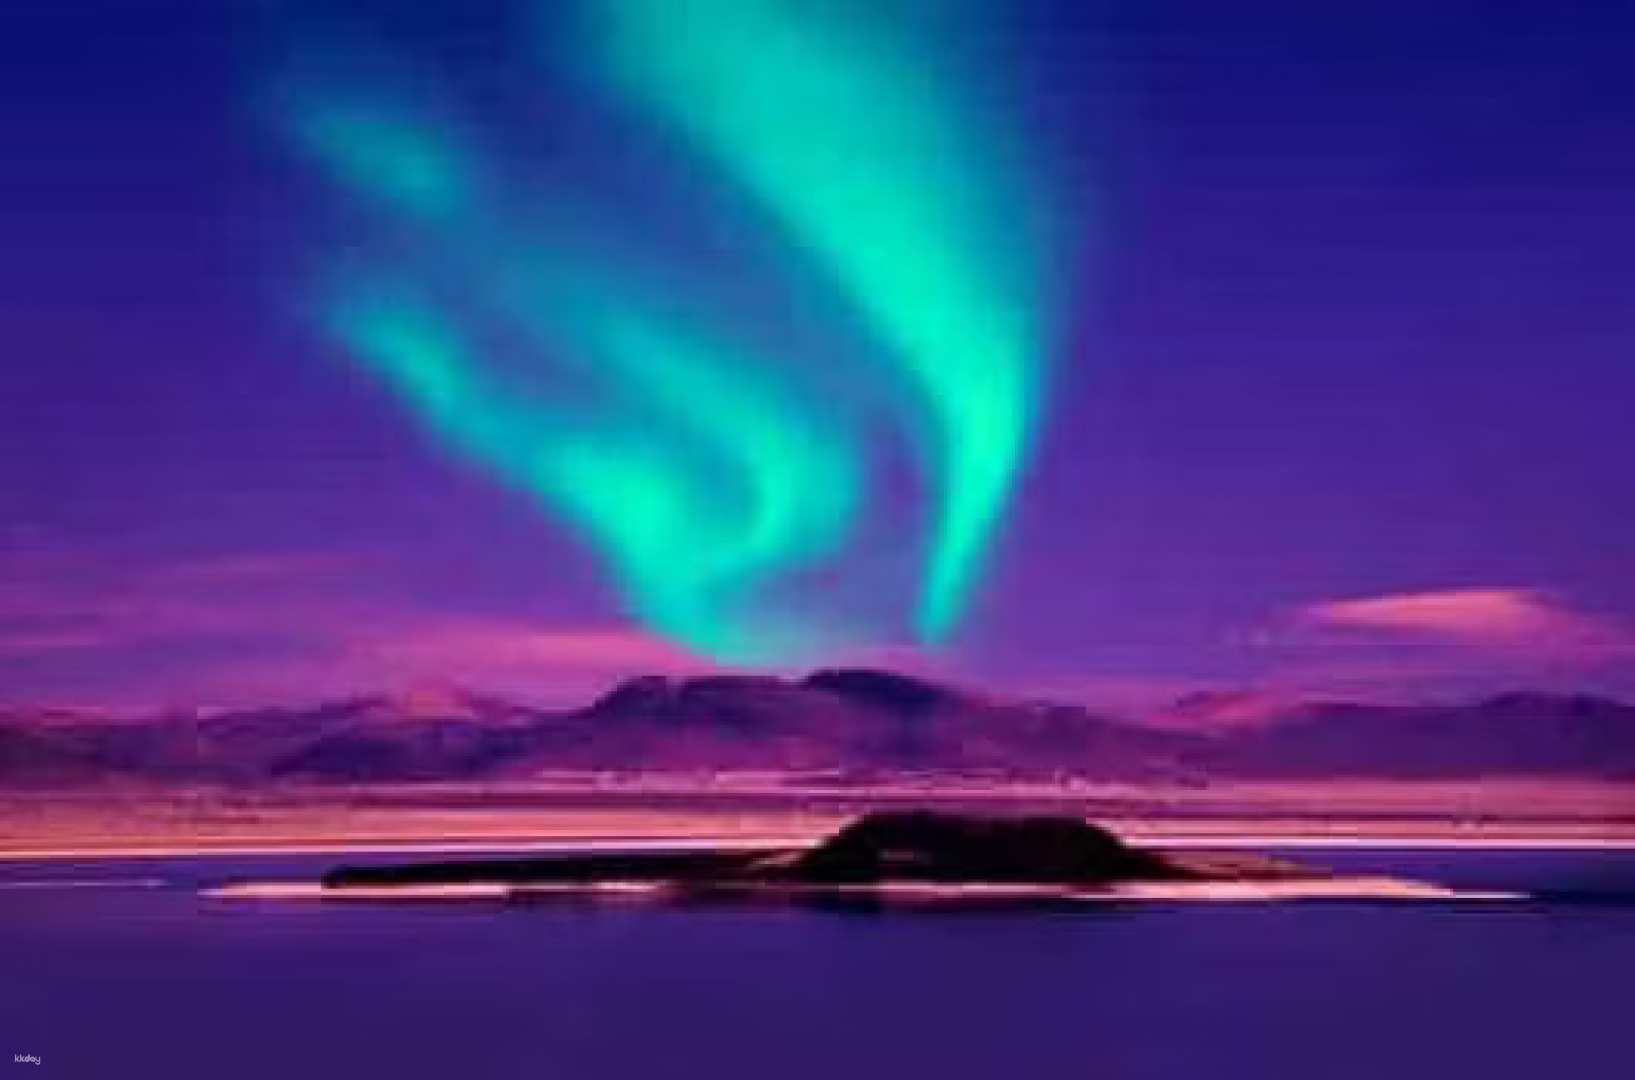 【Up to 15% Off】The South Coast & Northern Lights Tours from Reykjavik | Iceland